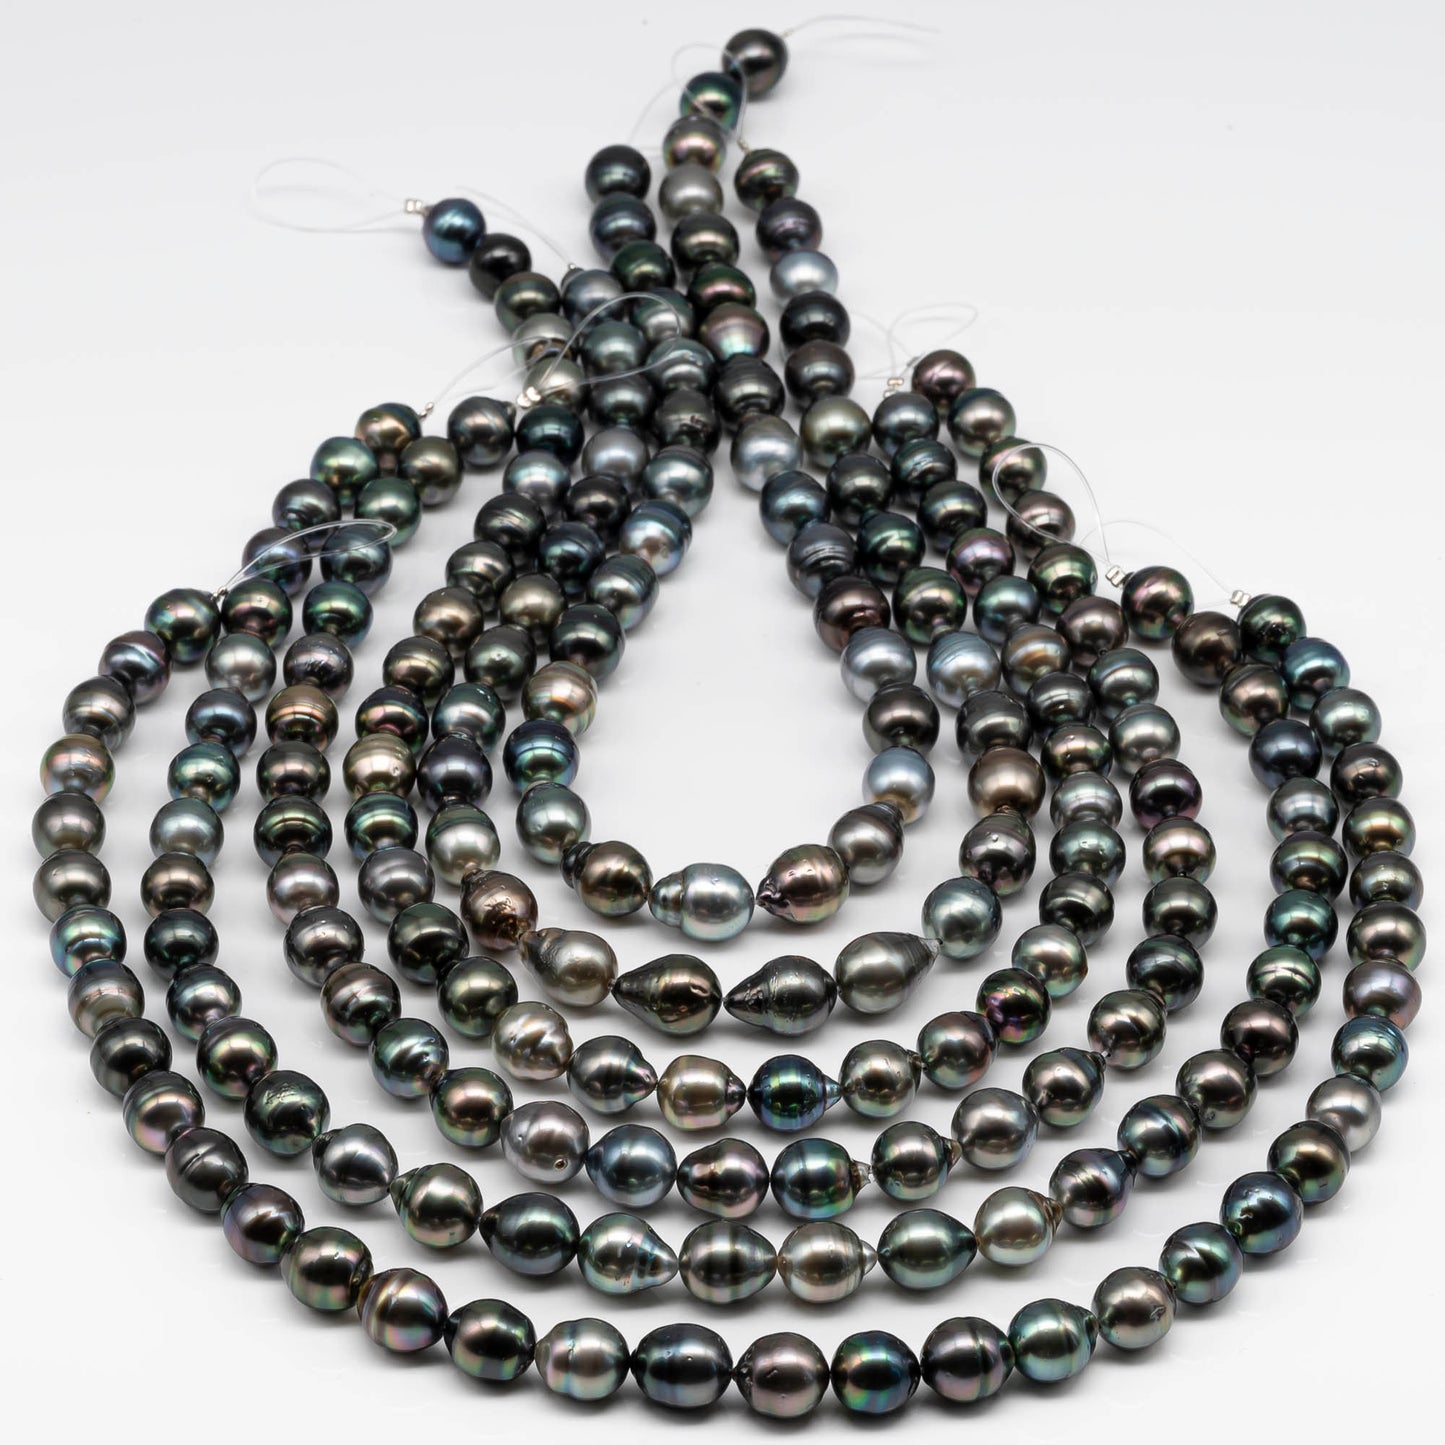 10-11mm Tahitian Pearl Drops with Natural Color and High Luster, Full Strand with Blemishes for Jewelry Making, SKU # 1718TH